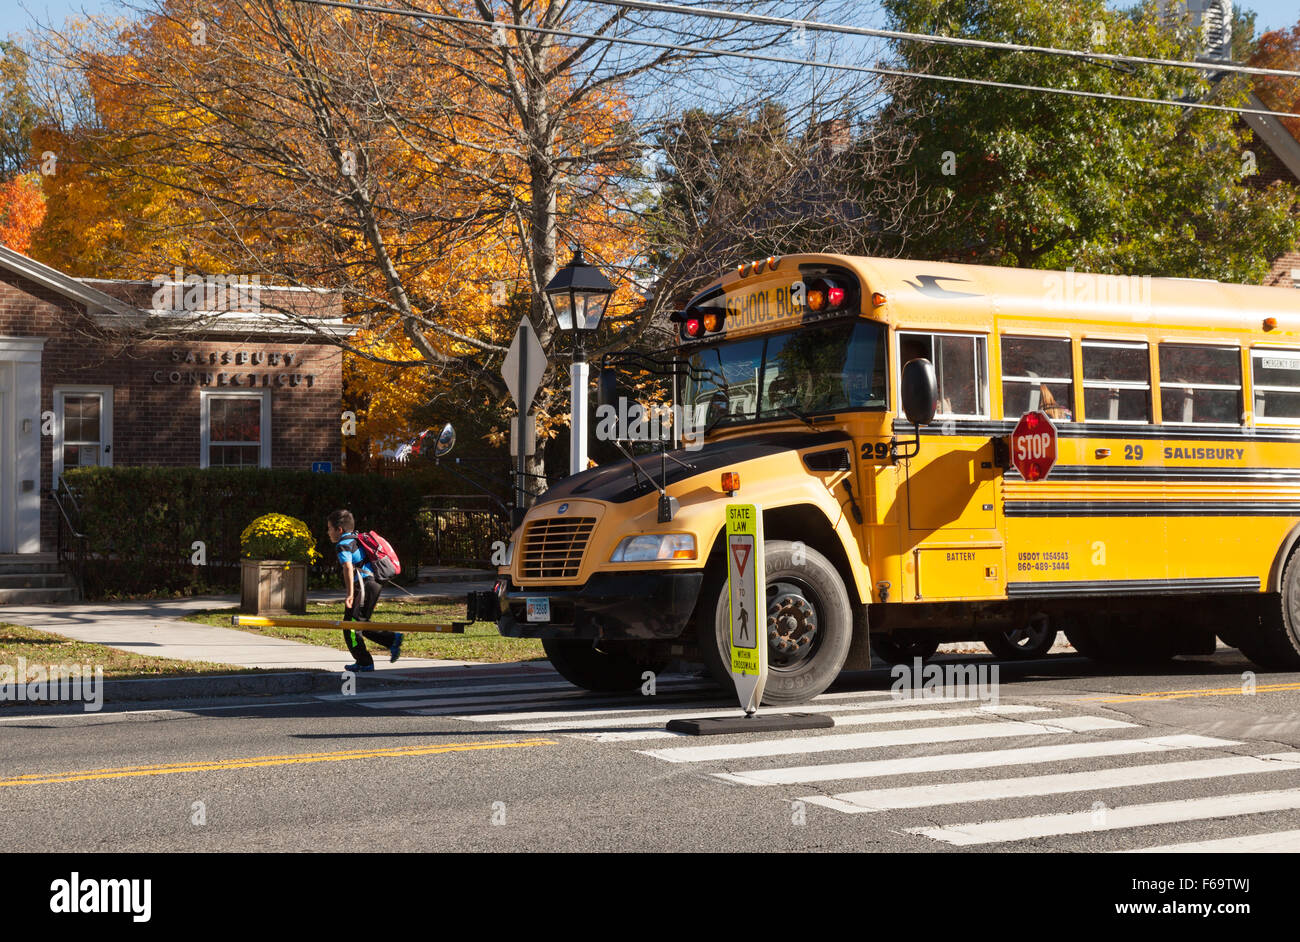 A USA school bus stopped to let children off, Salisbury, Connecticut USA Stock Photo